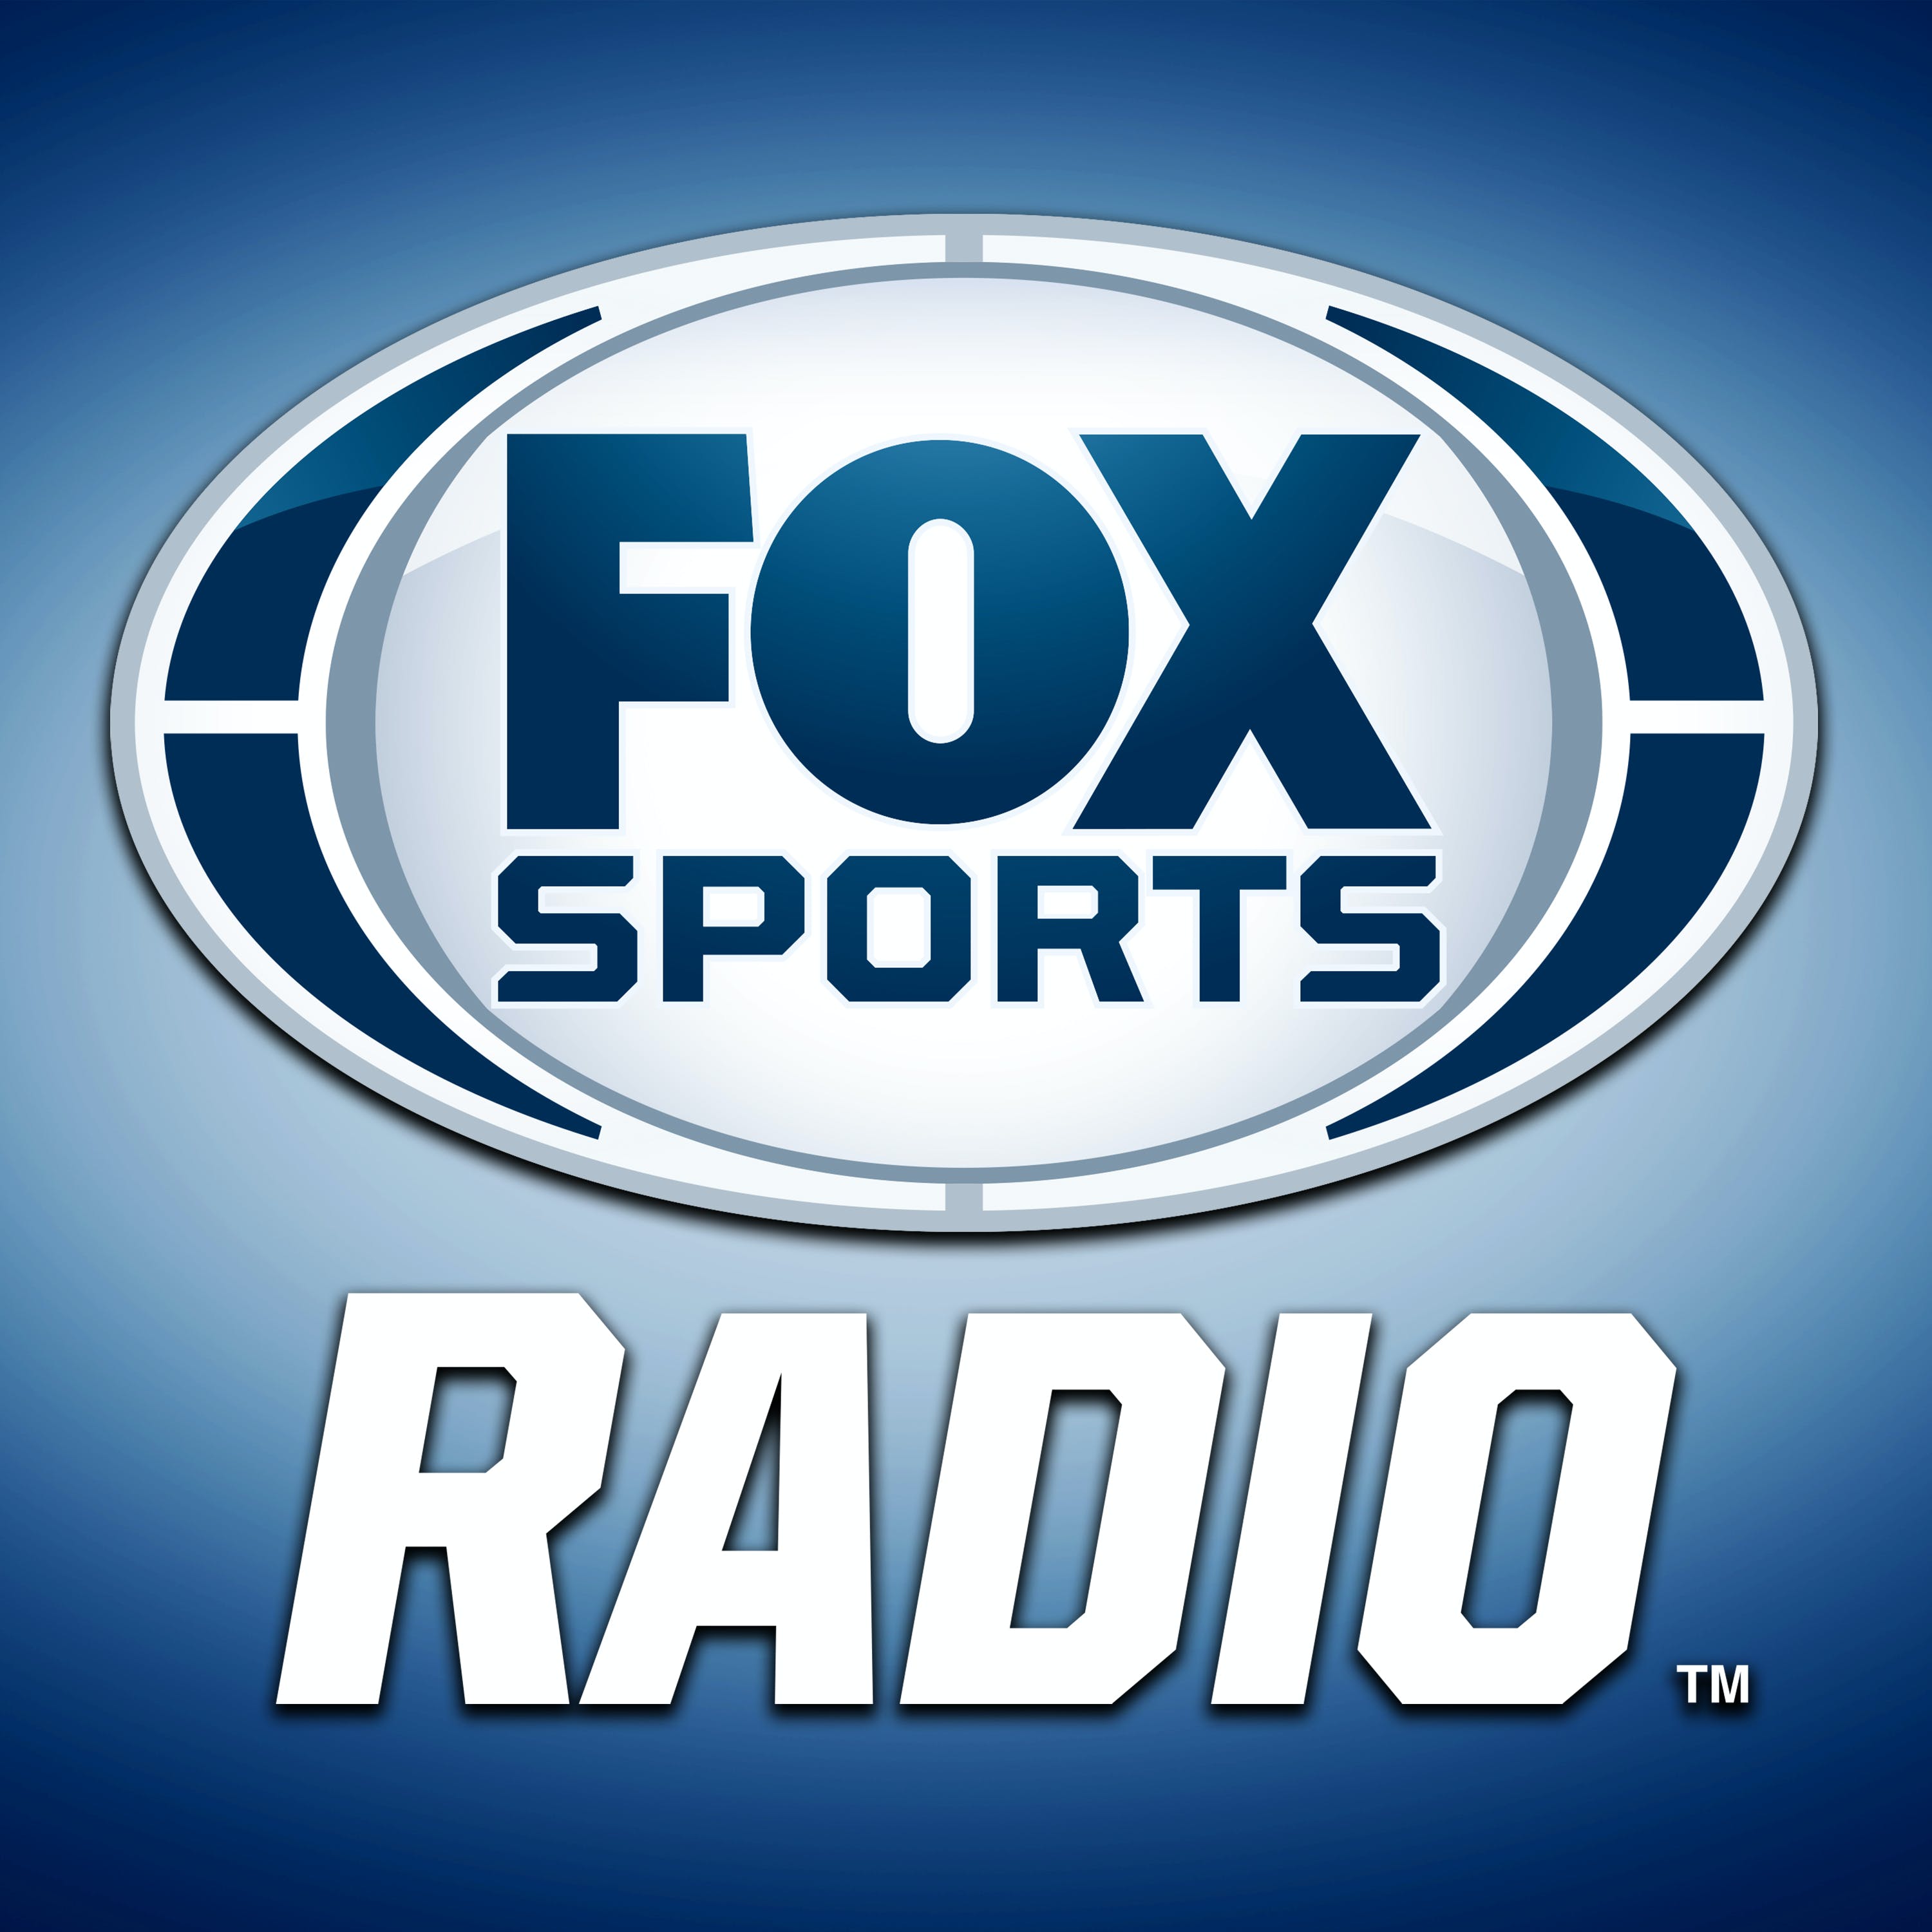 05/02/2021 – FOX Sports Sunday with Wrighster and Houshmandzadeh